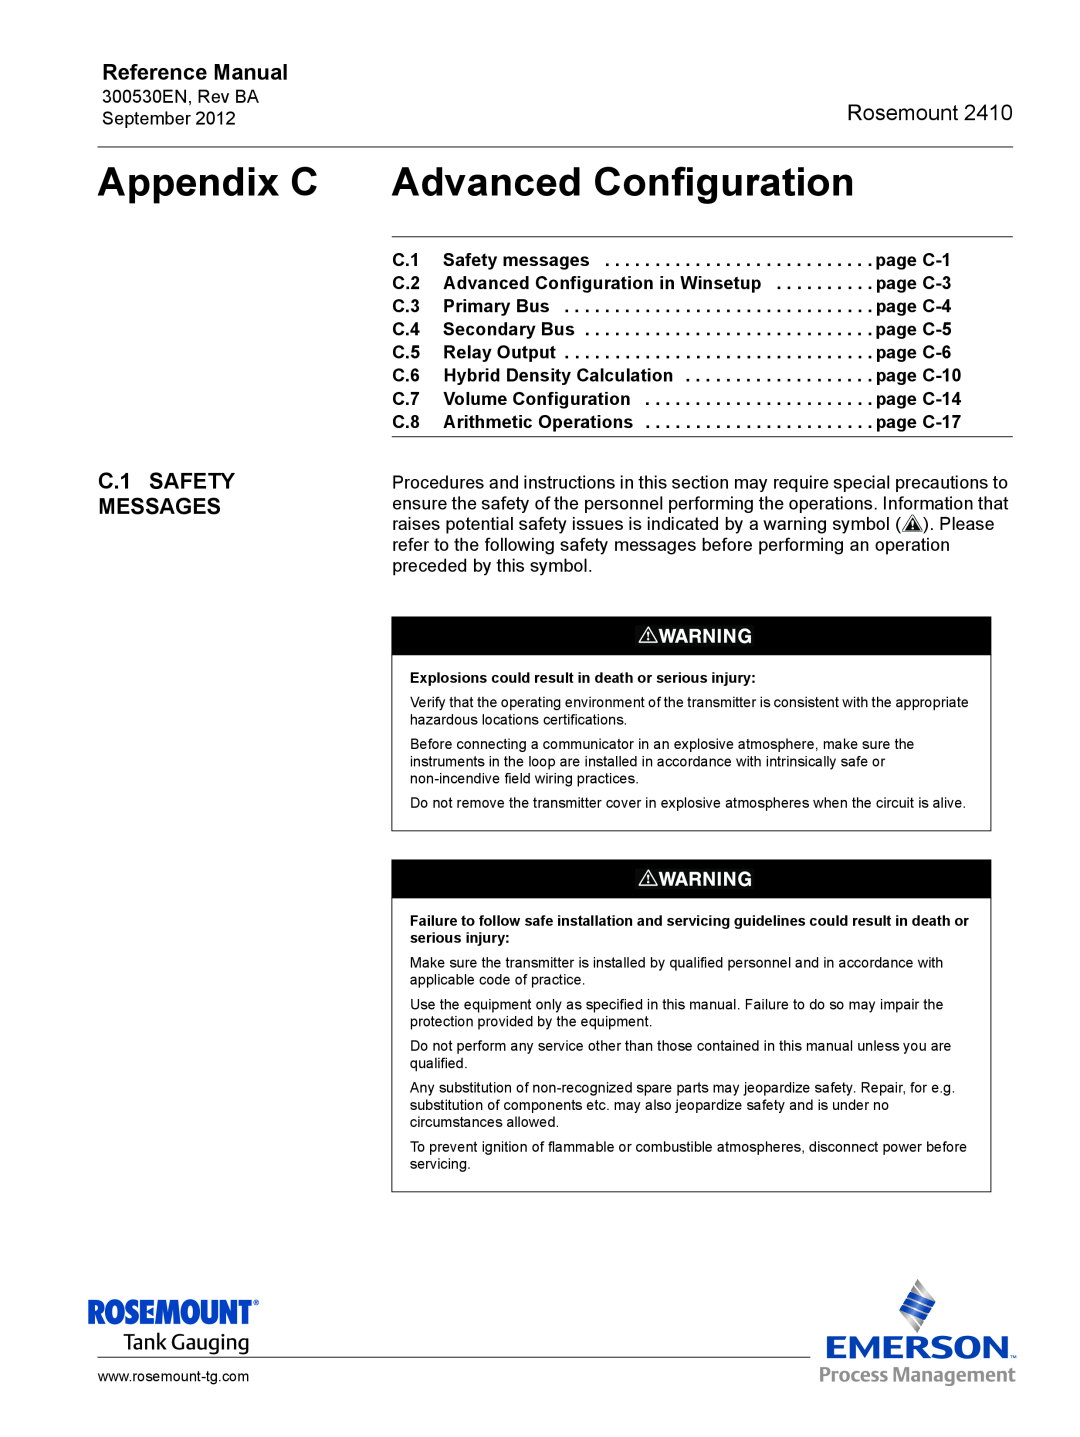 Emerson Process Management Rosemount 2410 manual Appendix C Advanced Configuration, C.1 SAFETY MESSAGES, Reference Manual 